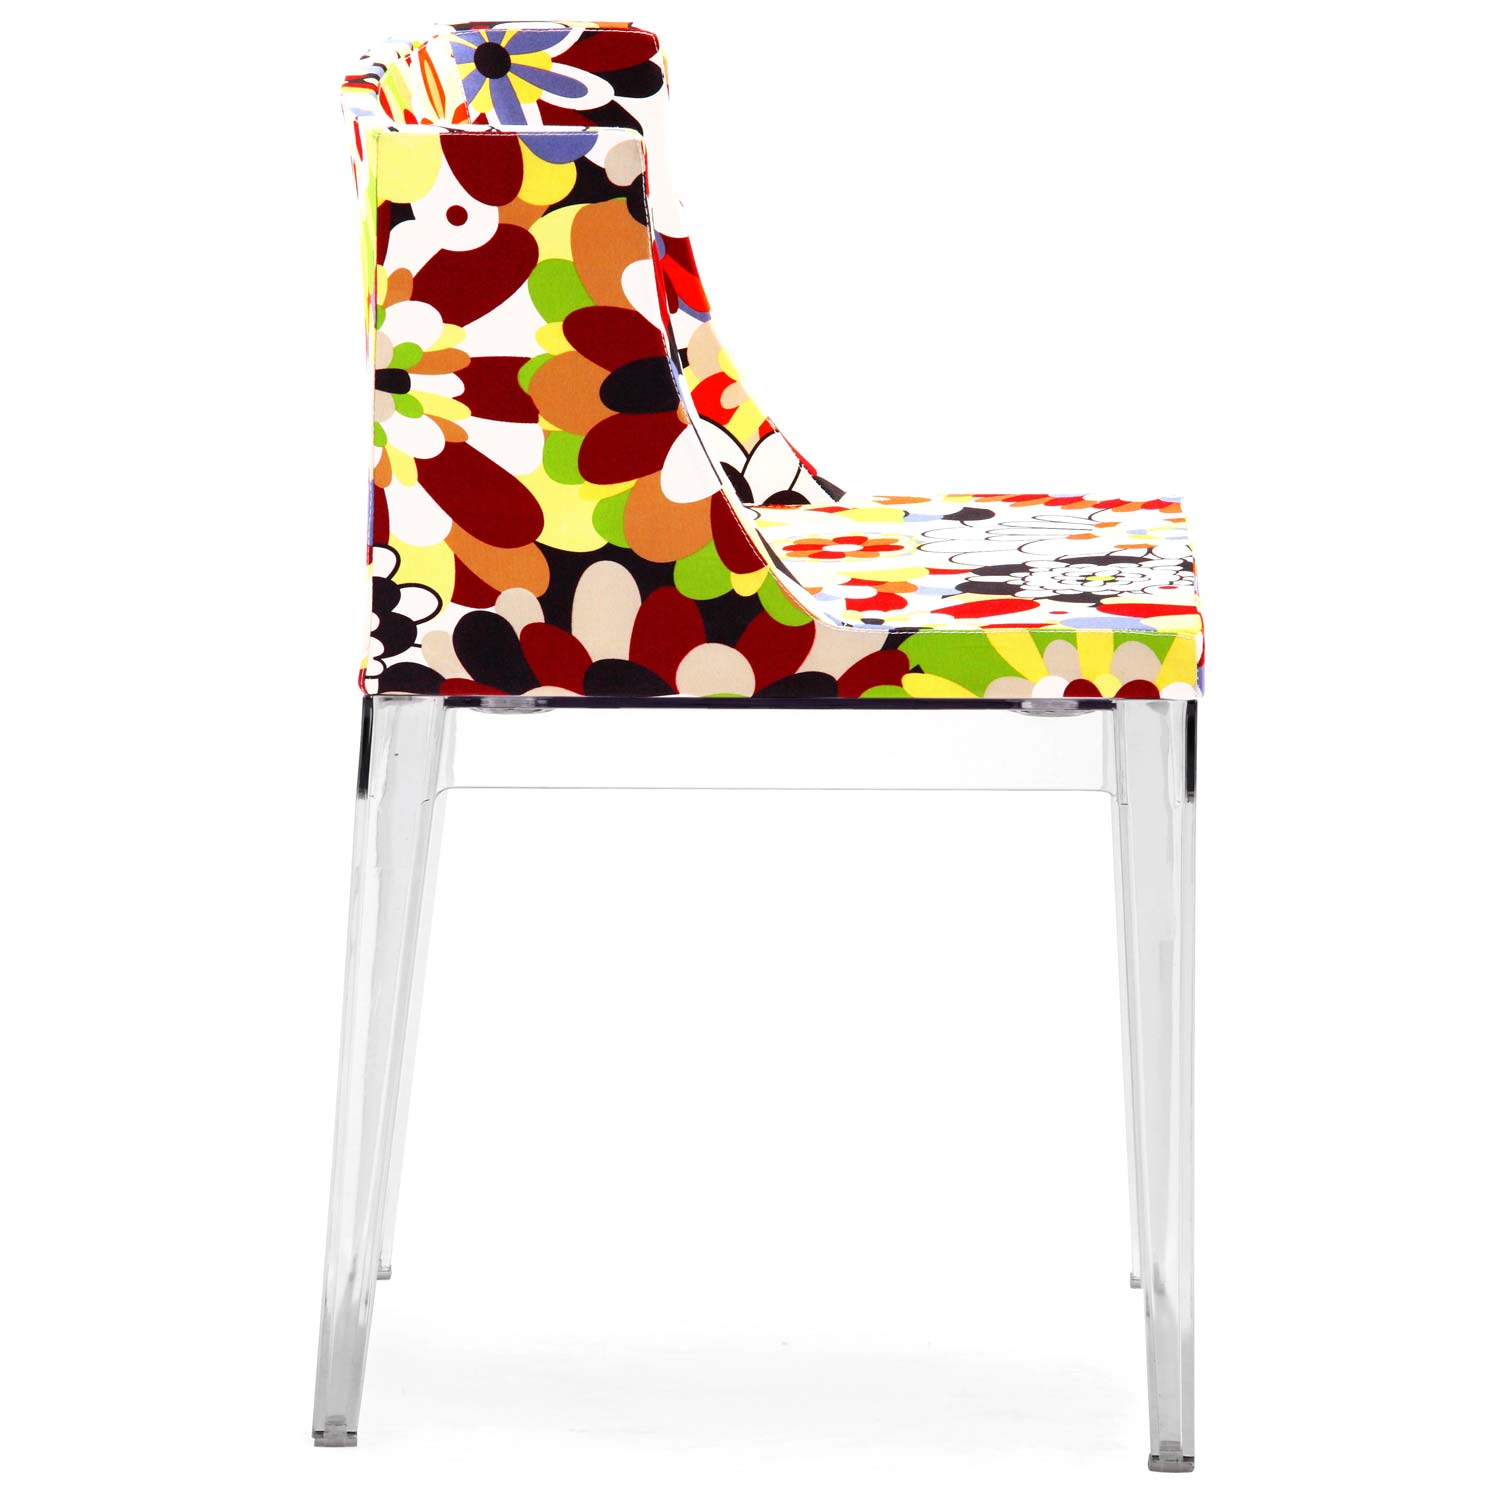 The eye catchy shape of the chair makes it even more outstanding